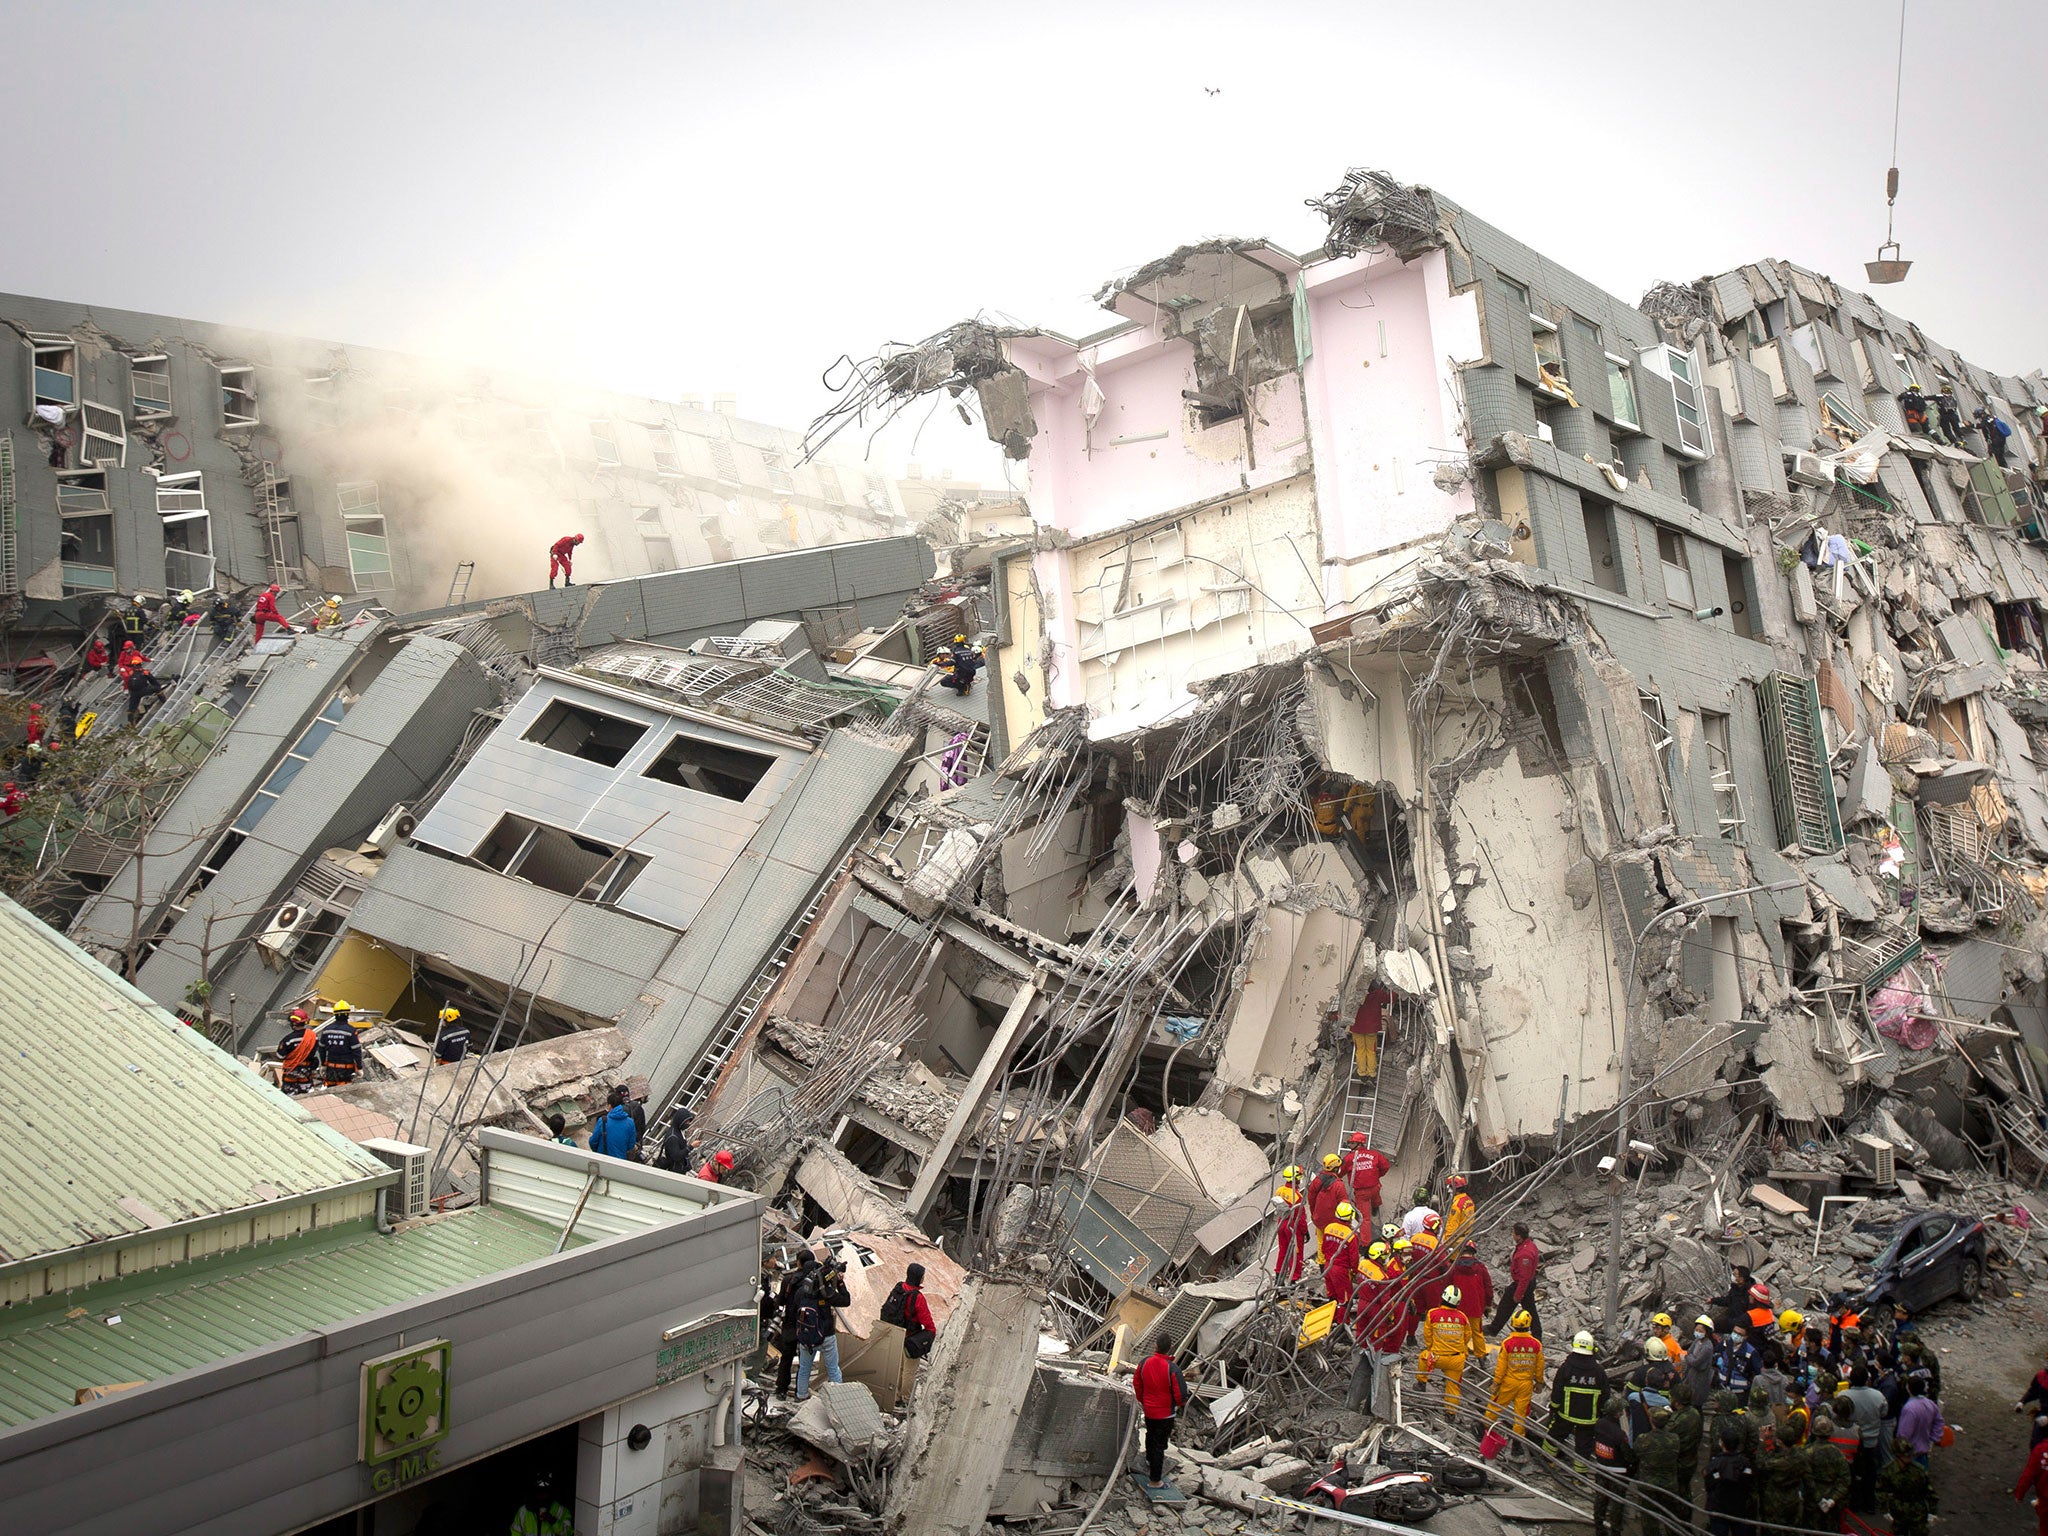 Rescue personnel search for survivors at the site of a collapsed building on 6 February, 2016 in Tainan, Taiwan